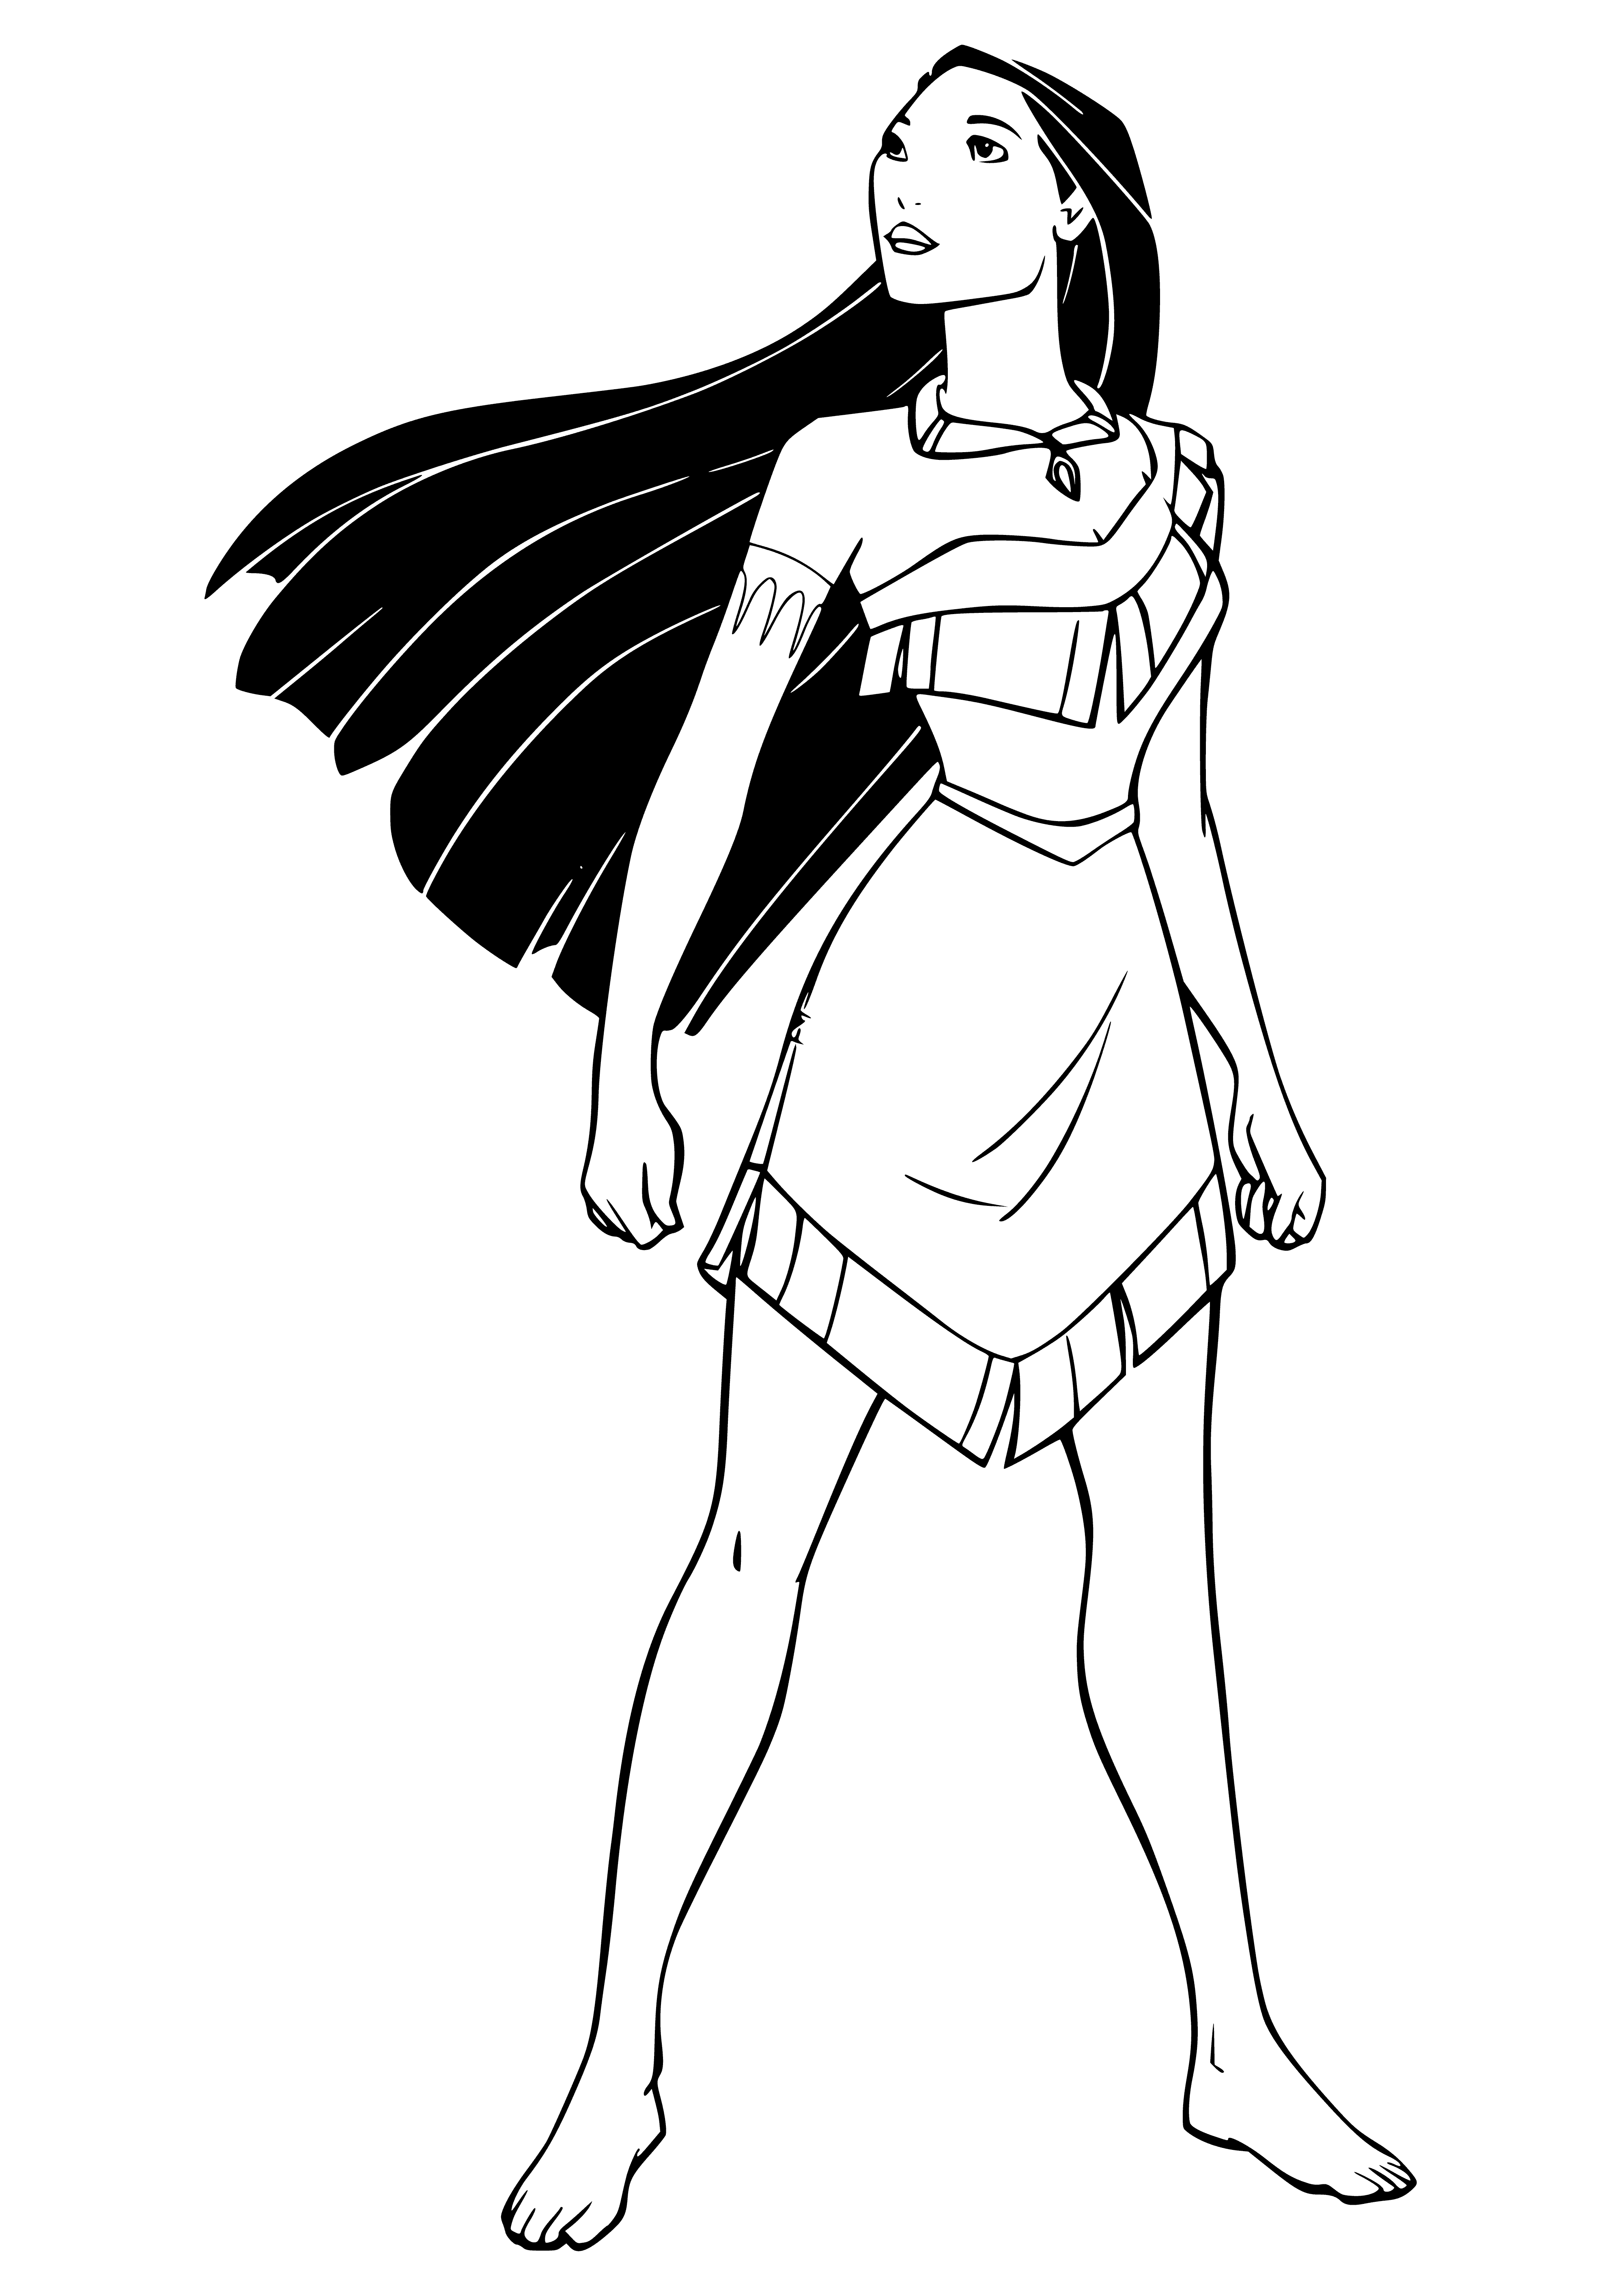 coloring page: Woman in light-colored dress and feathered hair standing in front of a tree.